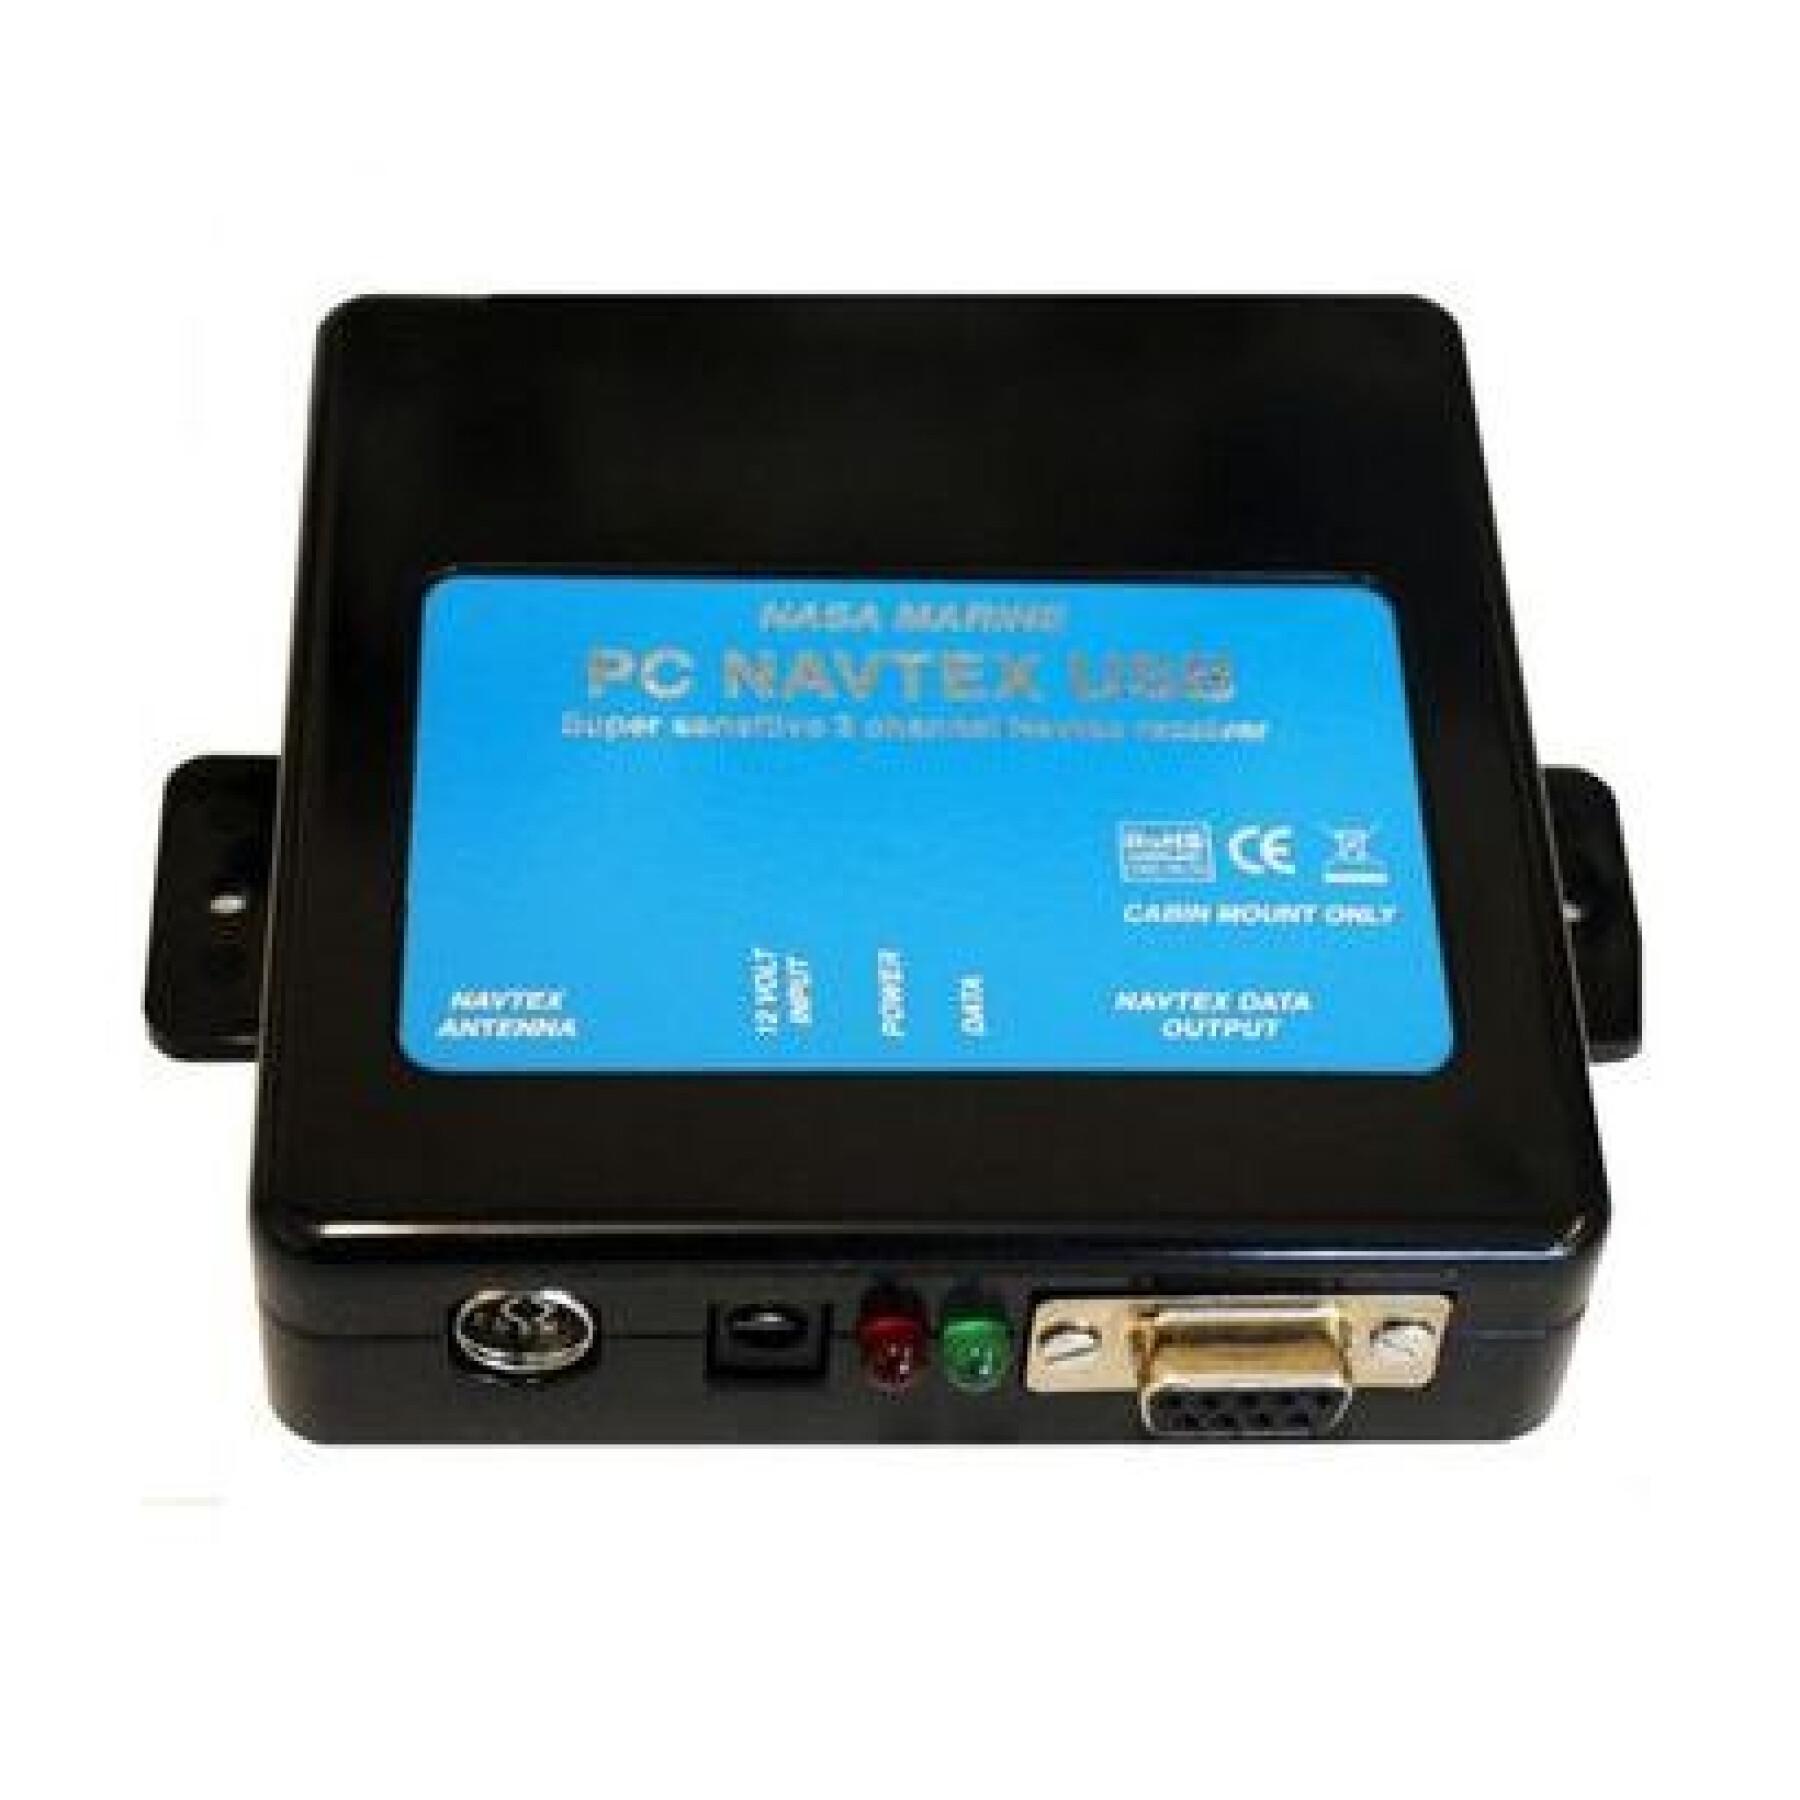 navtex receiver for pc delivered with antenna series 2 Nasa